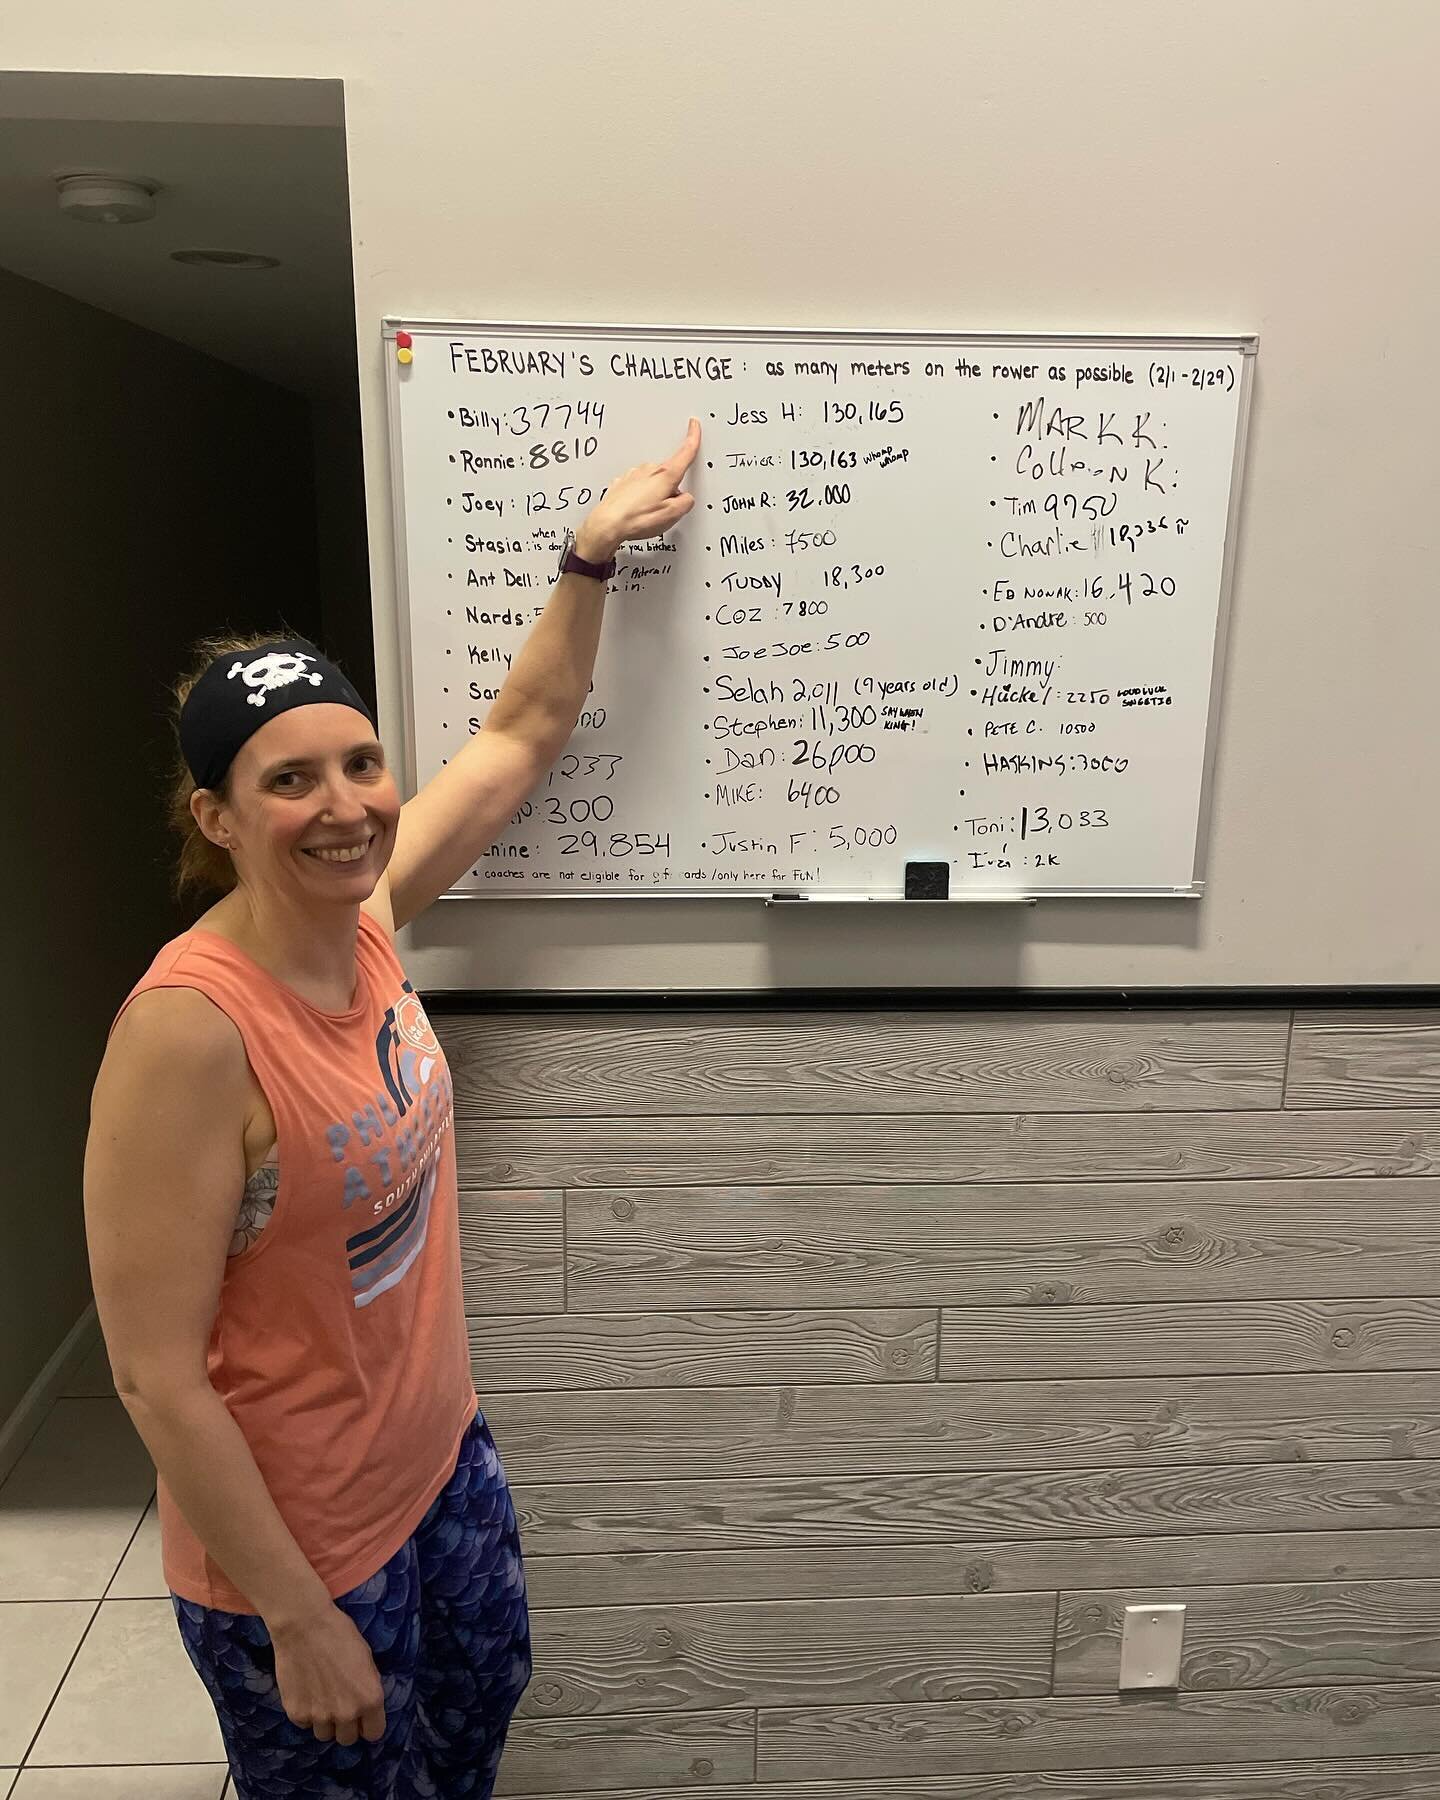 Y&rsquo;all SHOWED OUT for February&rsquo;s challenge! We just want to give a huge congratulations to Jessica Hirschhorn for winning February&rsquo;s row challenge 👏🏼 she rowed over 43k meters on the last day to take the W. Yes, 43k meters, over a 